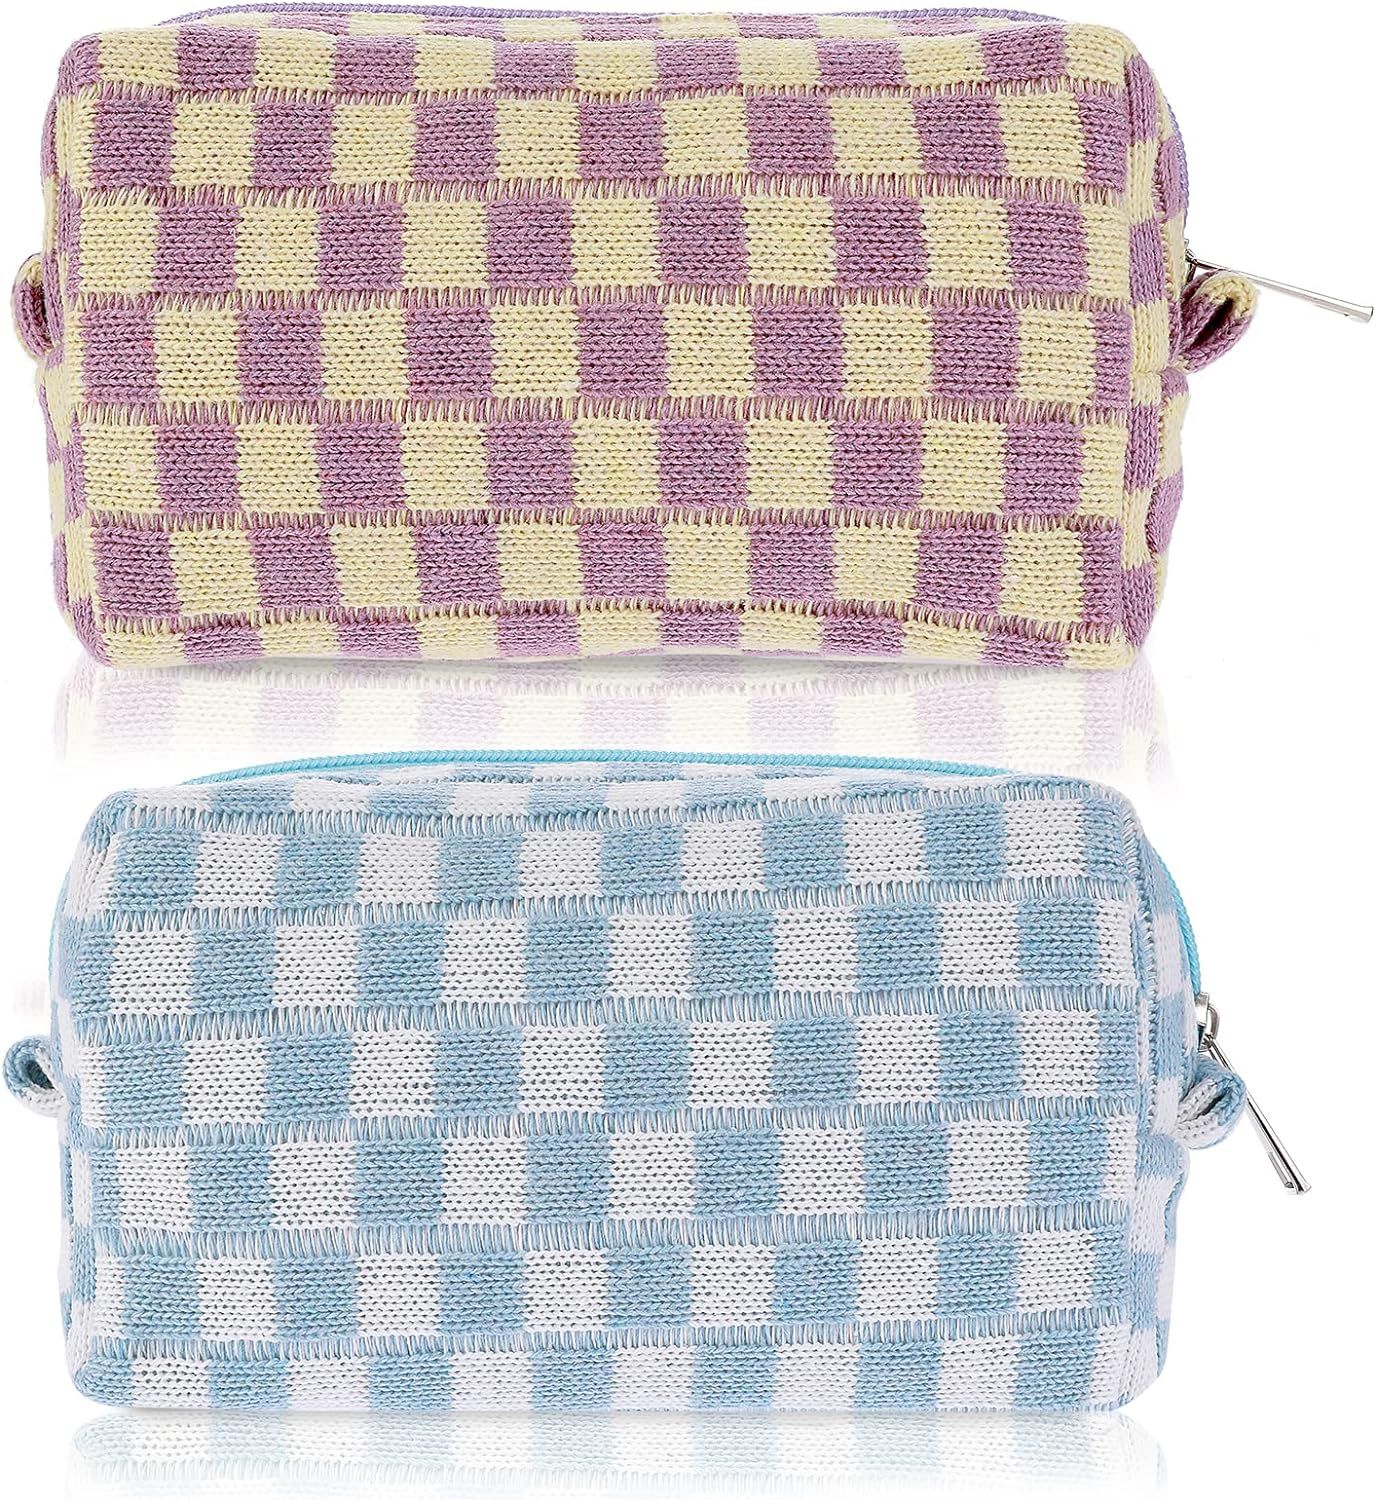 WLLHYF 2 Pieces Checkered Makeup Bag Pouch Zipper Travel Toiletry Bag Storage Cosmetic Large Capa... | Amazon (US)